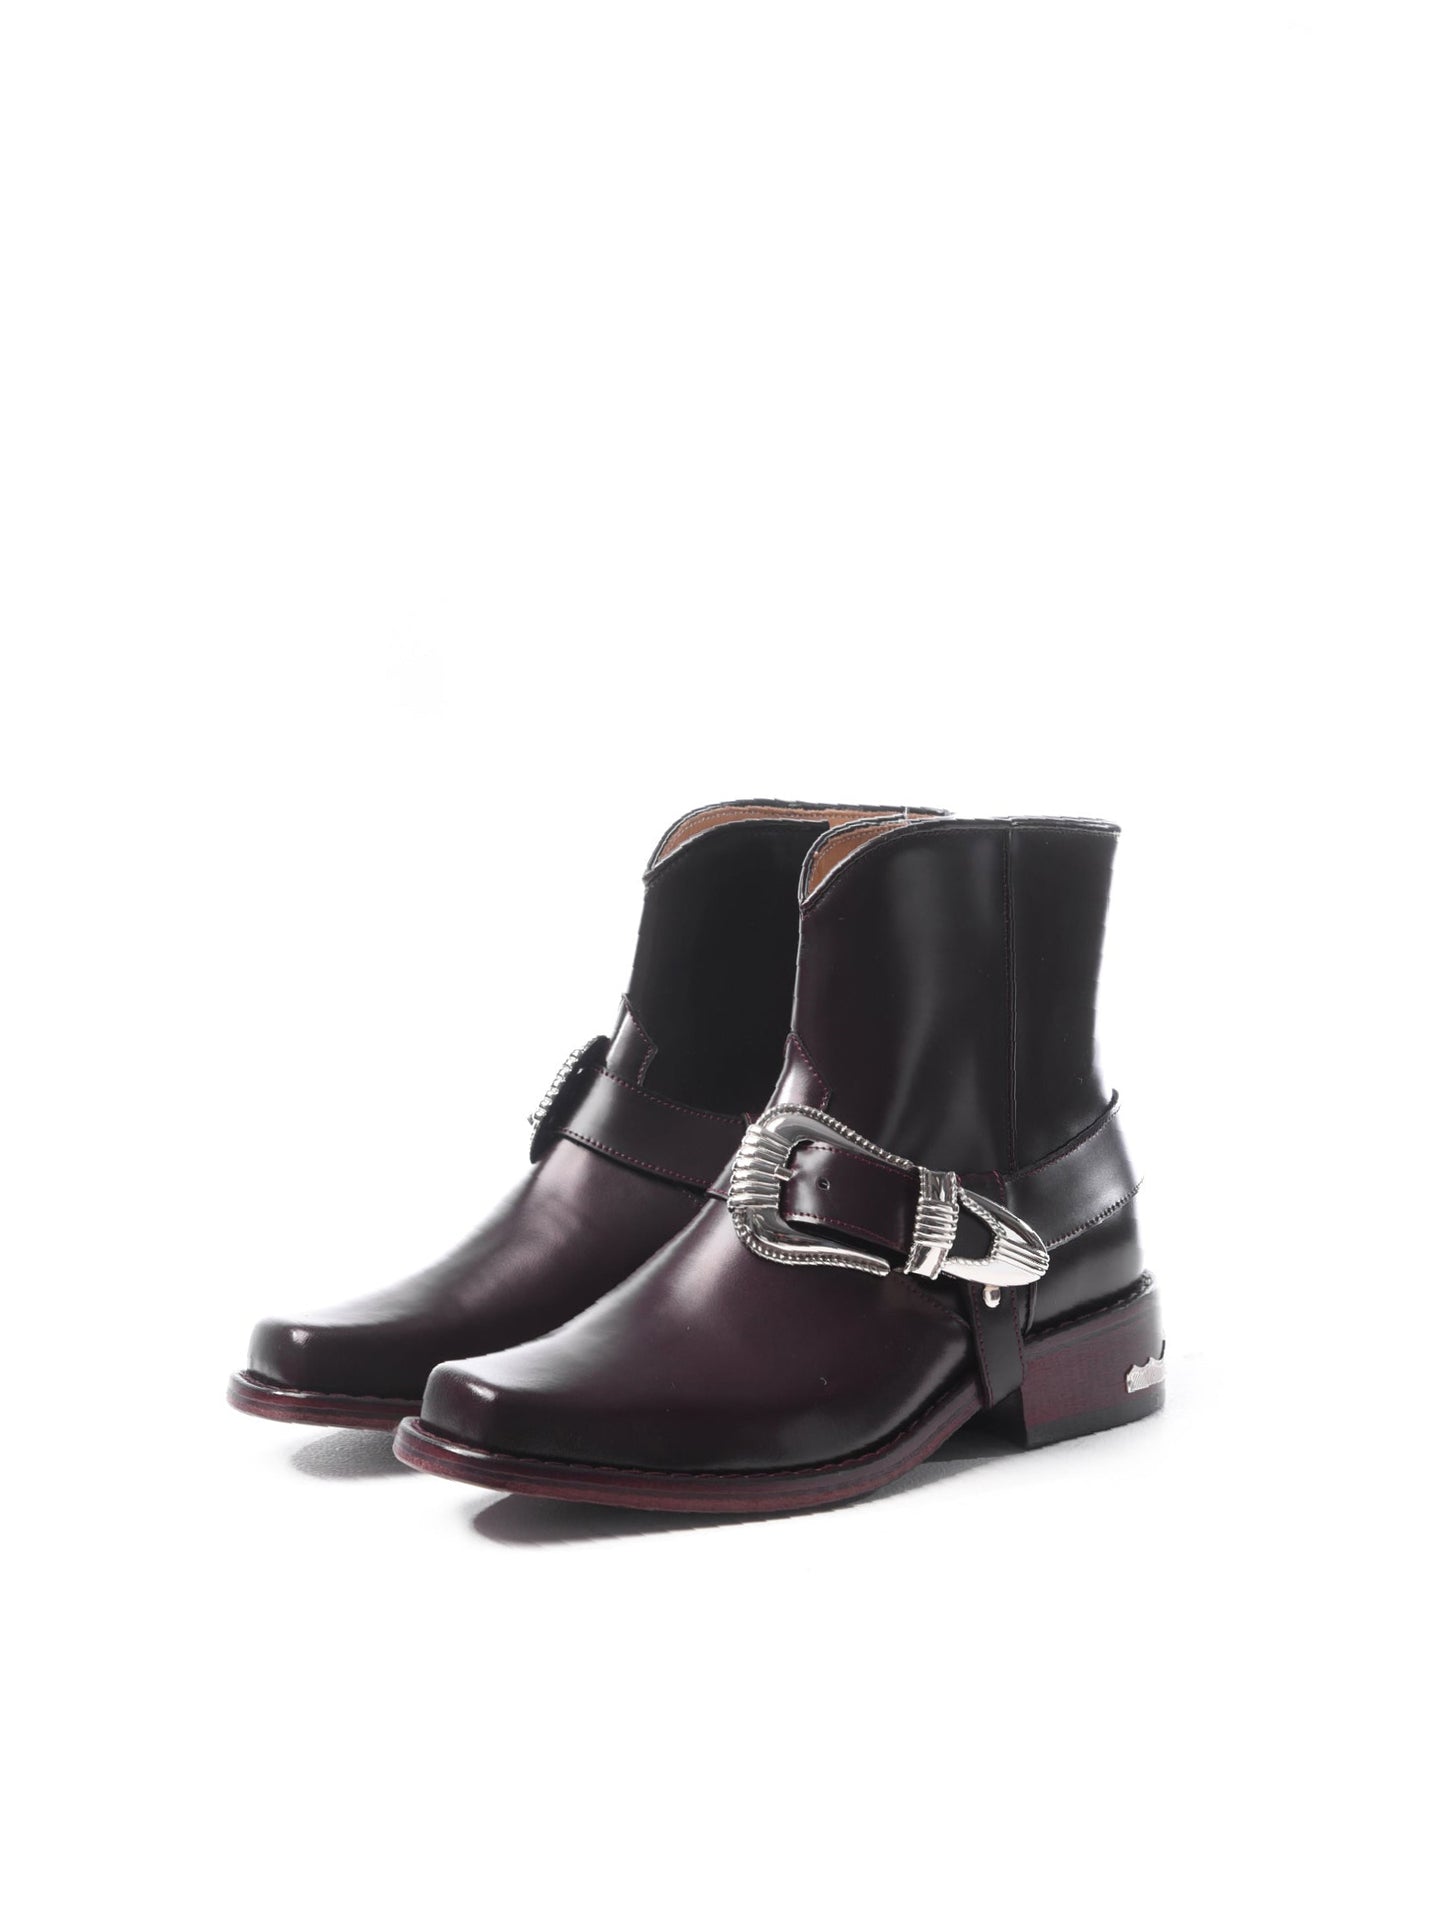 Toga Archives Oxblood Leather Polido Buckle Boots